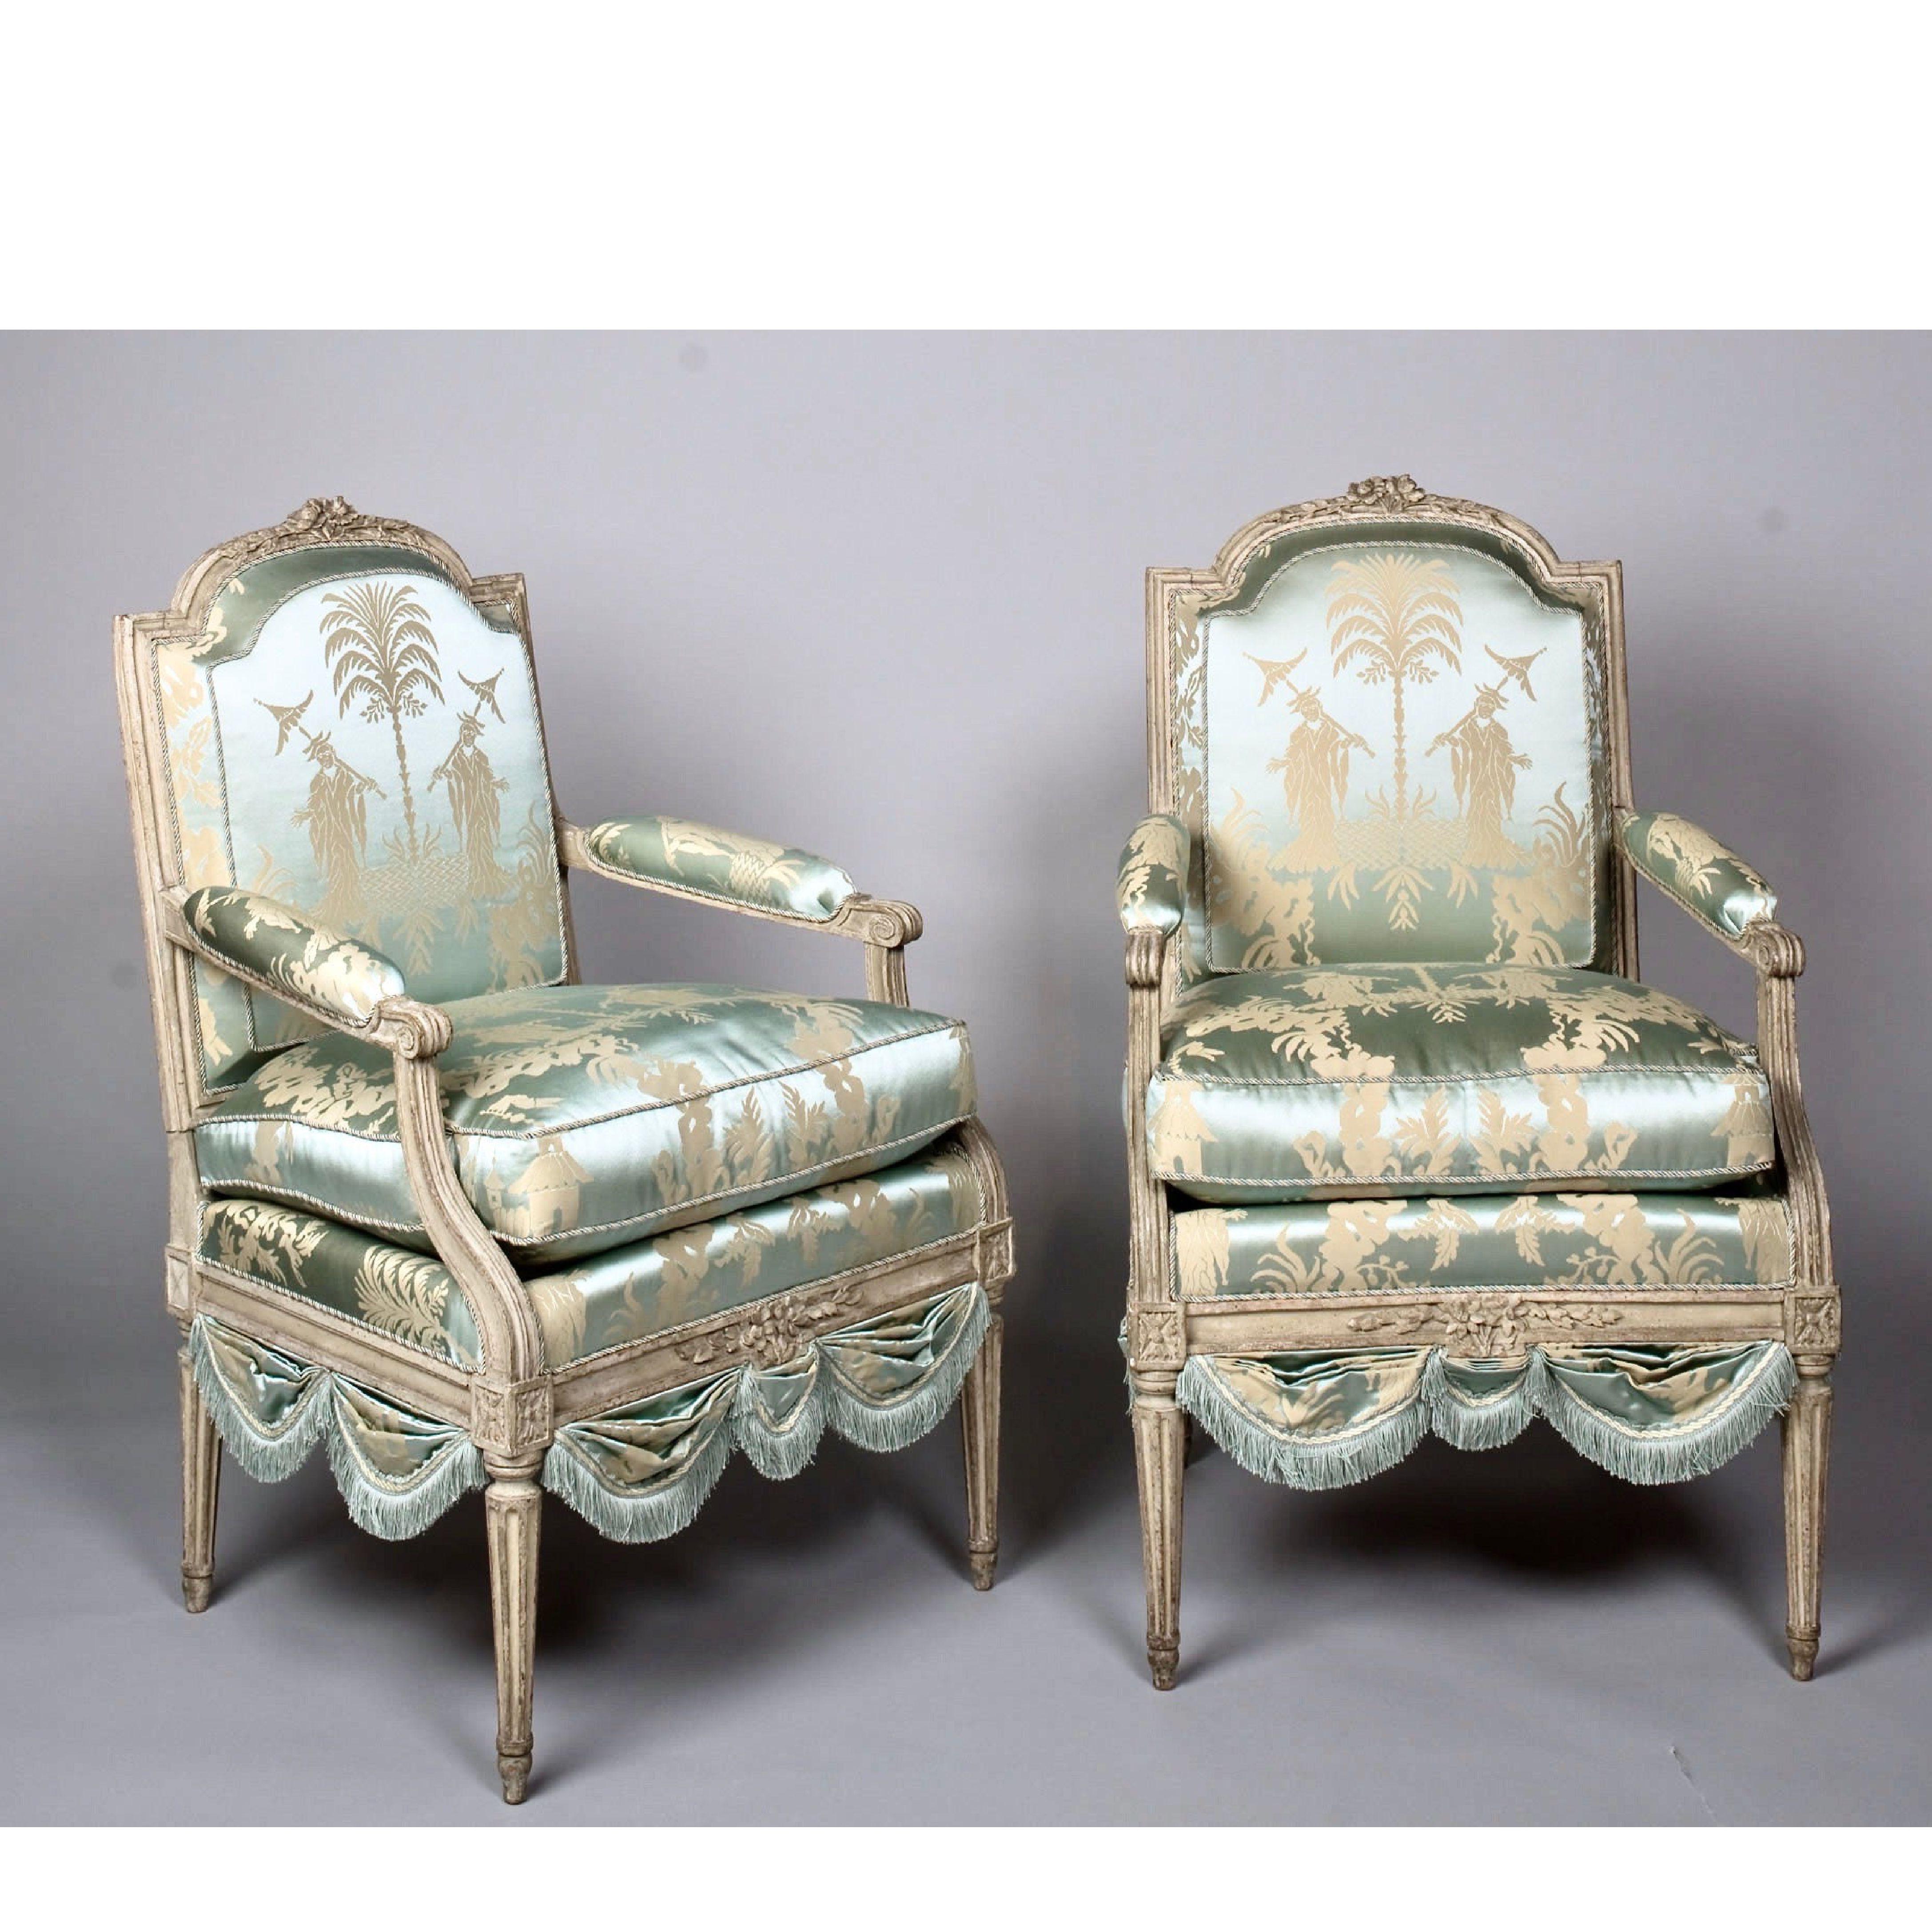 Louis XVI French silk armchair, Claude II Sené Fauteuil a la Reine, early 1780s. Arched, padded back with stylized flowerhead hand carved topsail, similarly poetic hand carved seat rail. Raised on gracefully tapering, fluted legs. Reupholstered in